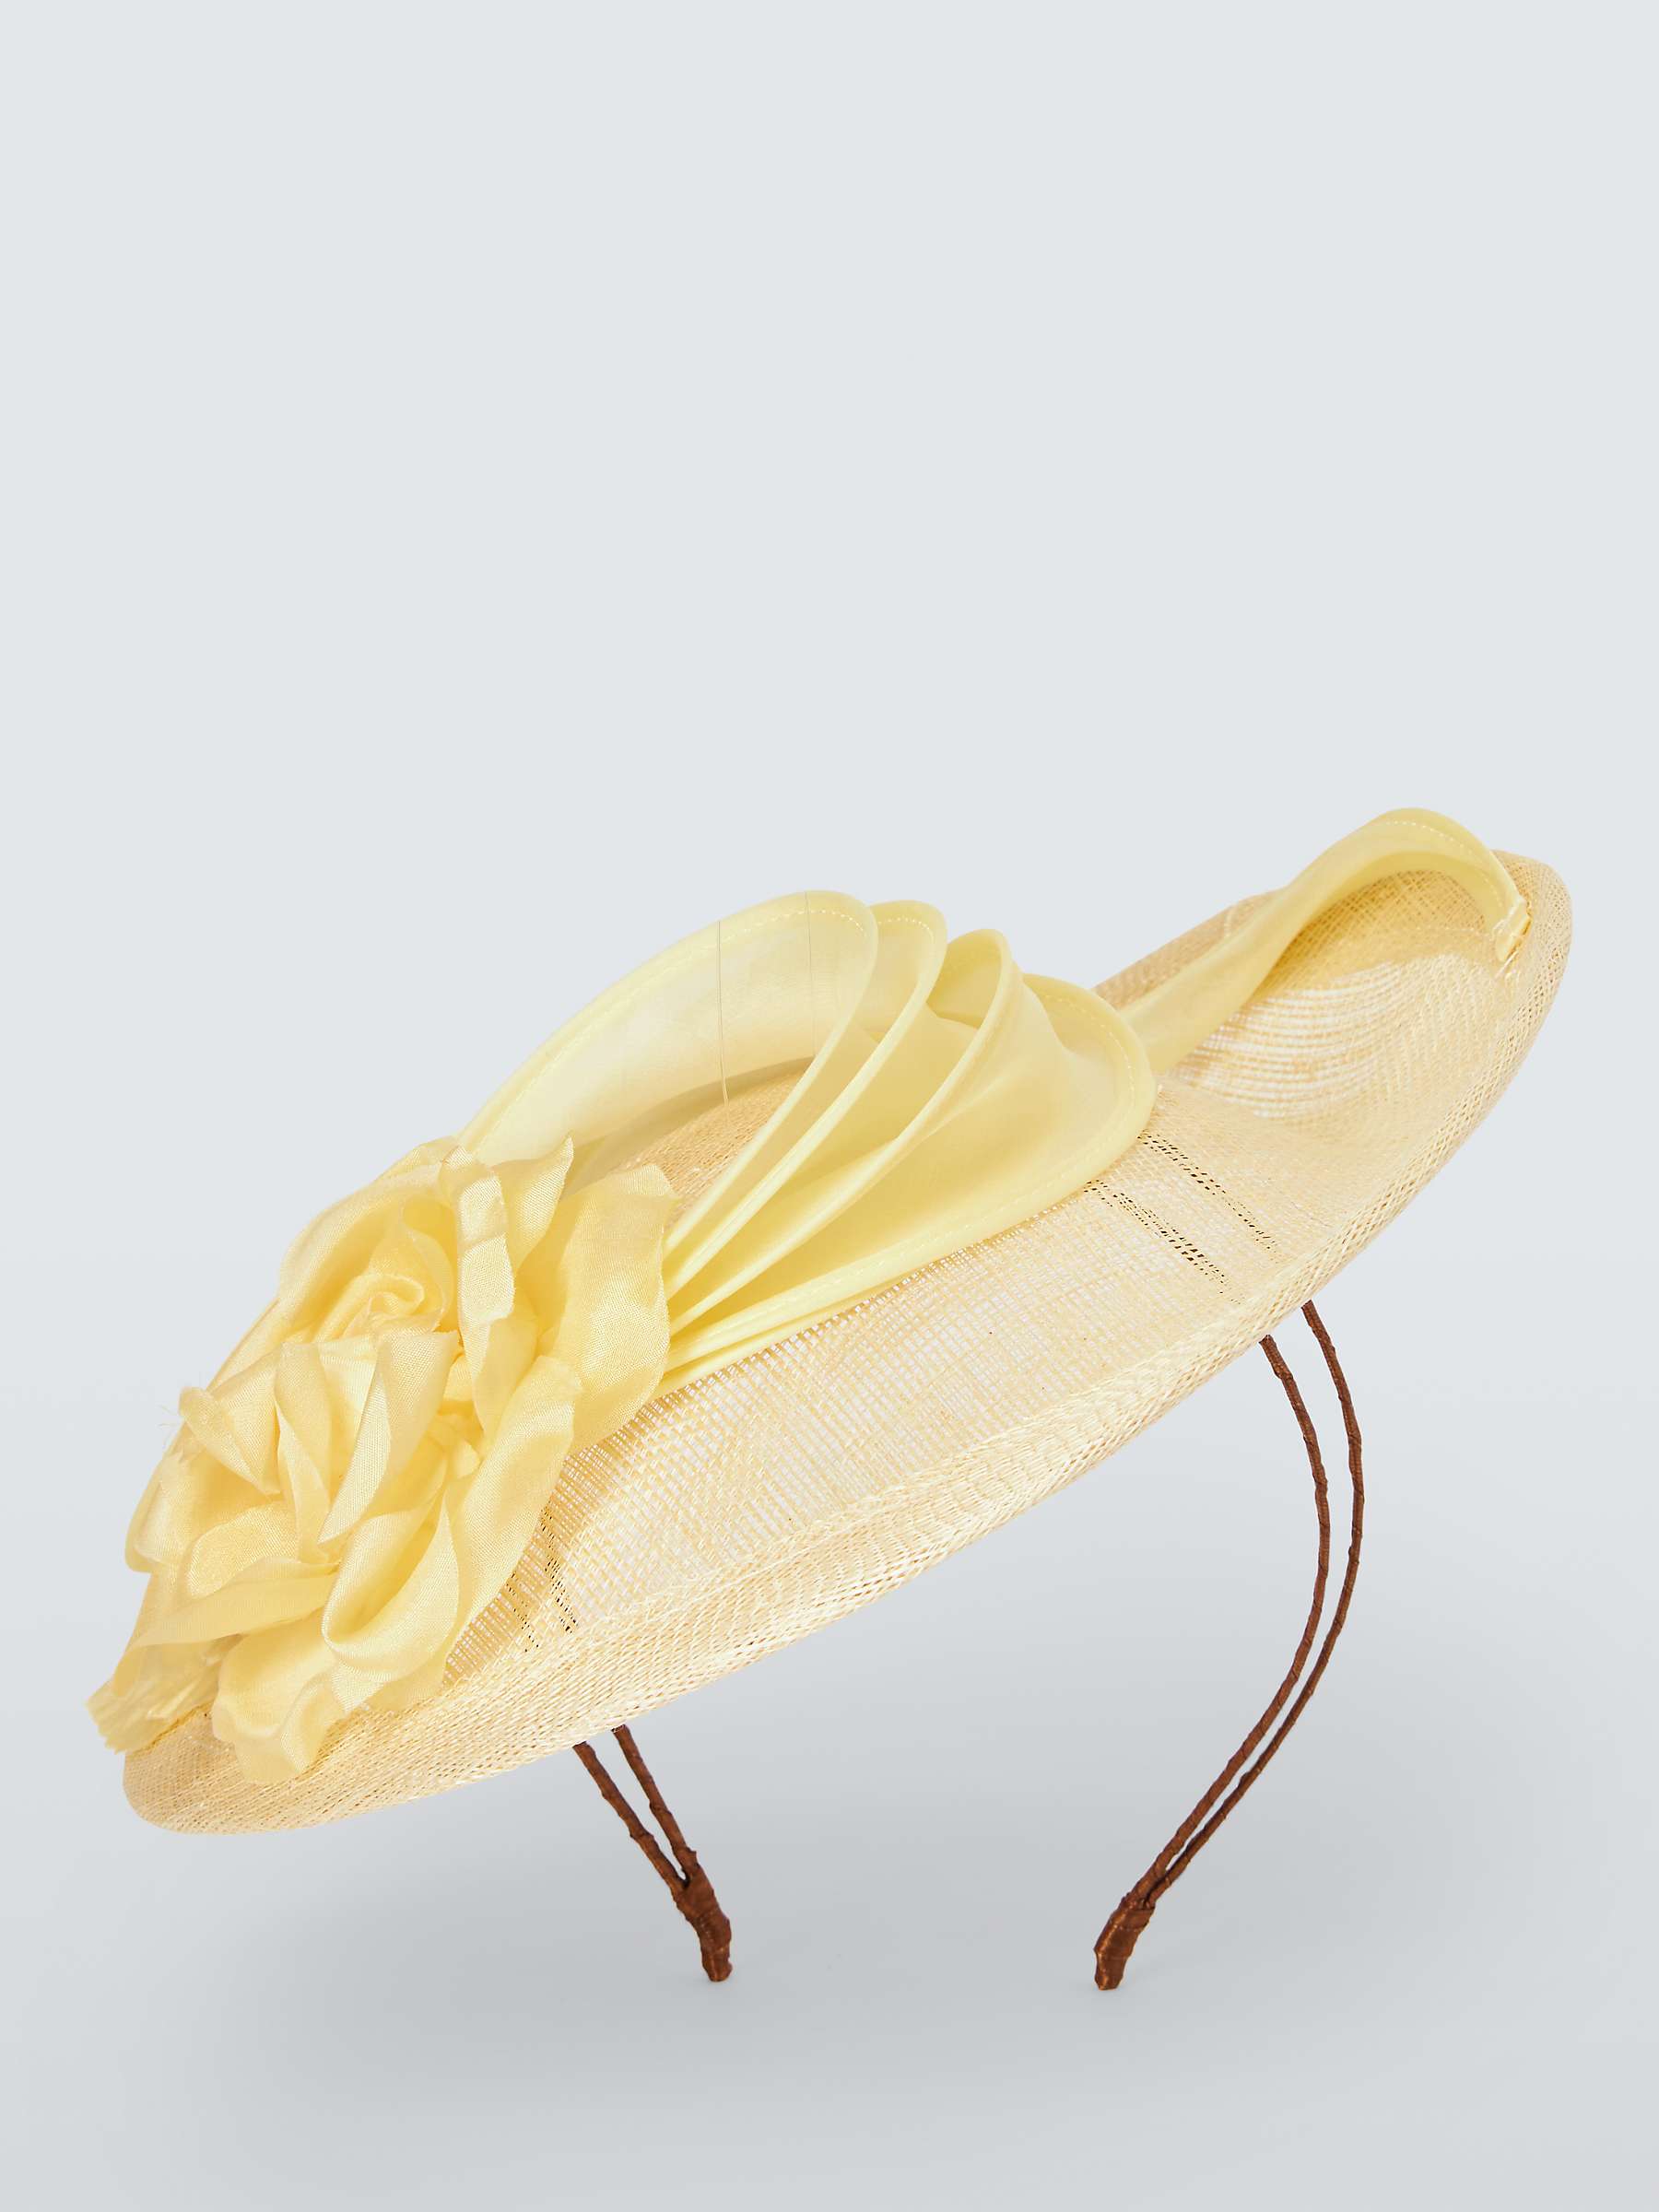 Buy Whiteley Made in England Maeve Small Abaca Disc Occasion Hat Online at johnlewis.com